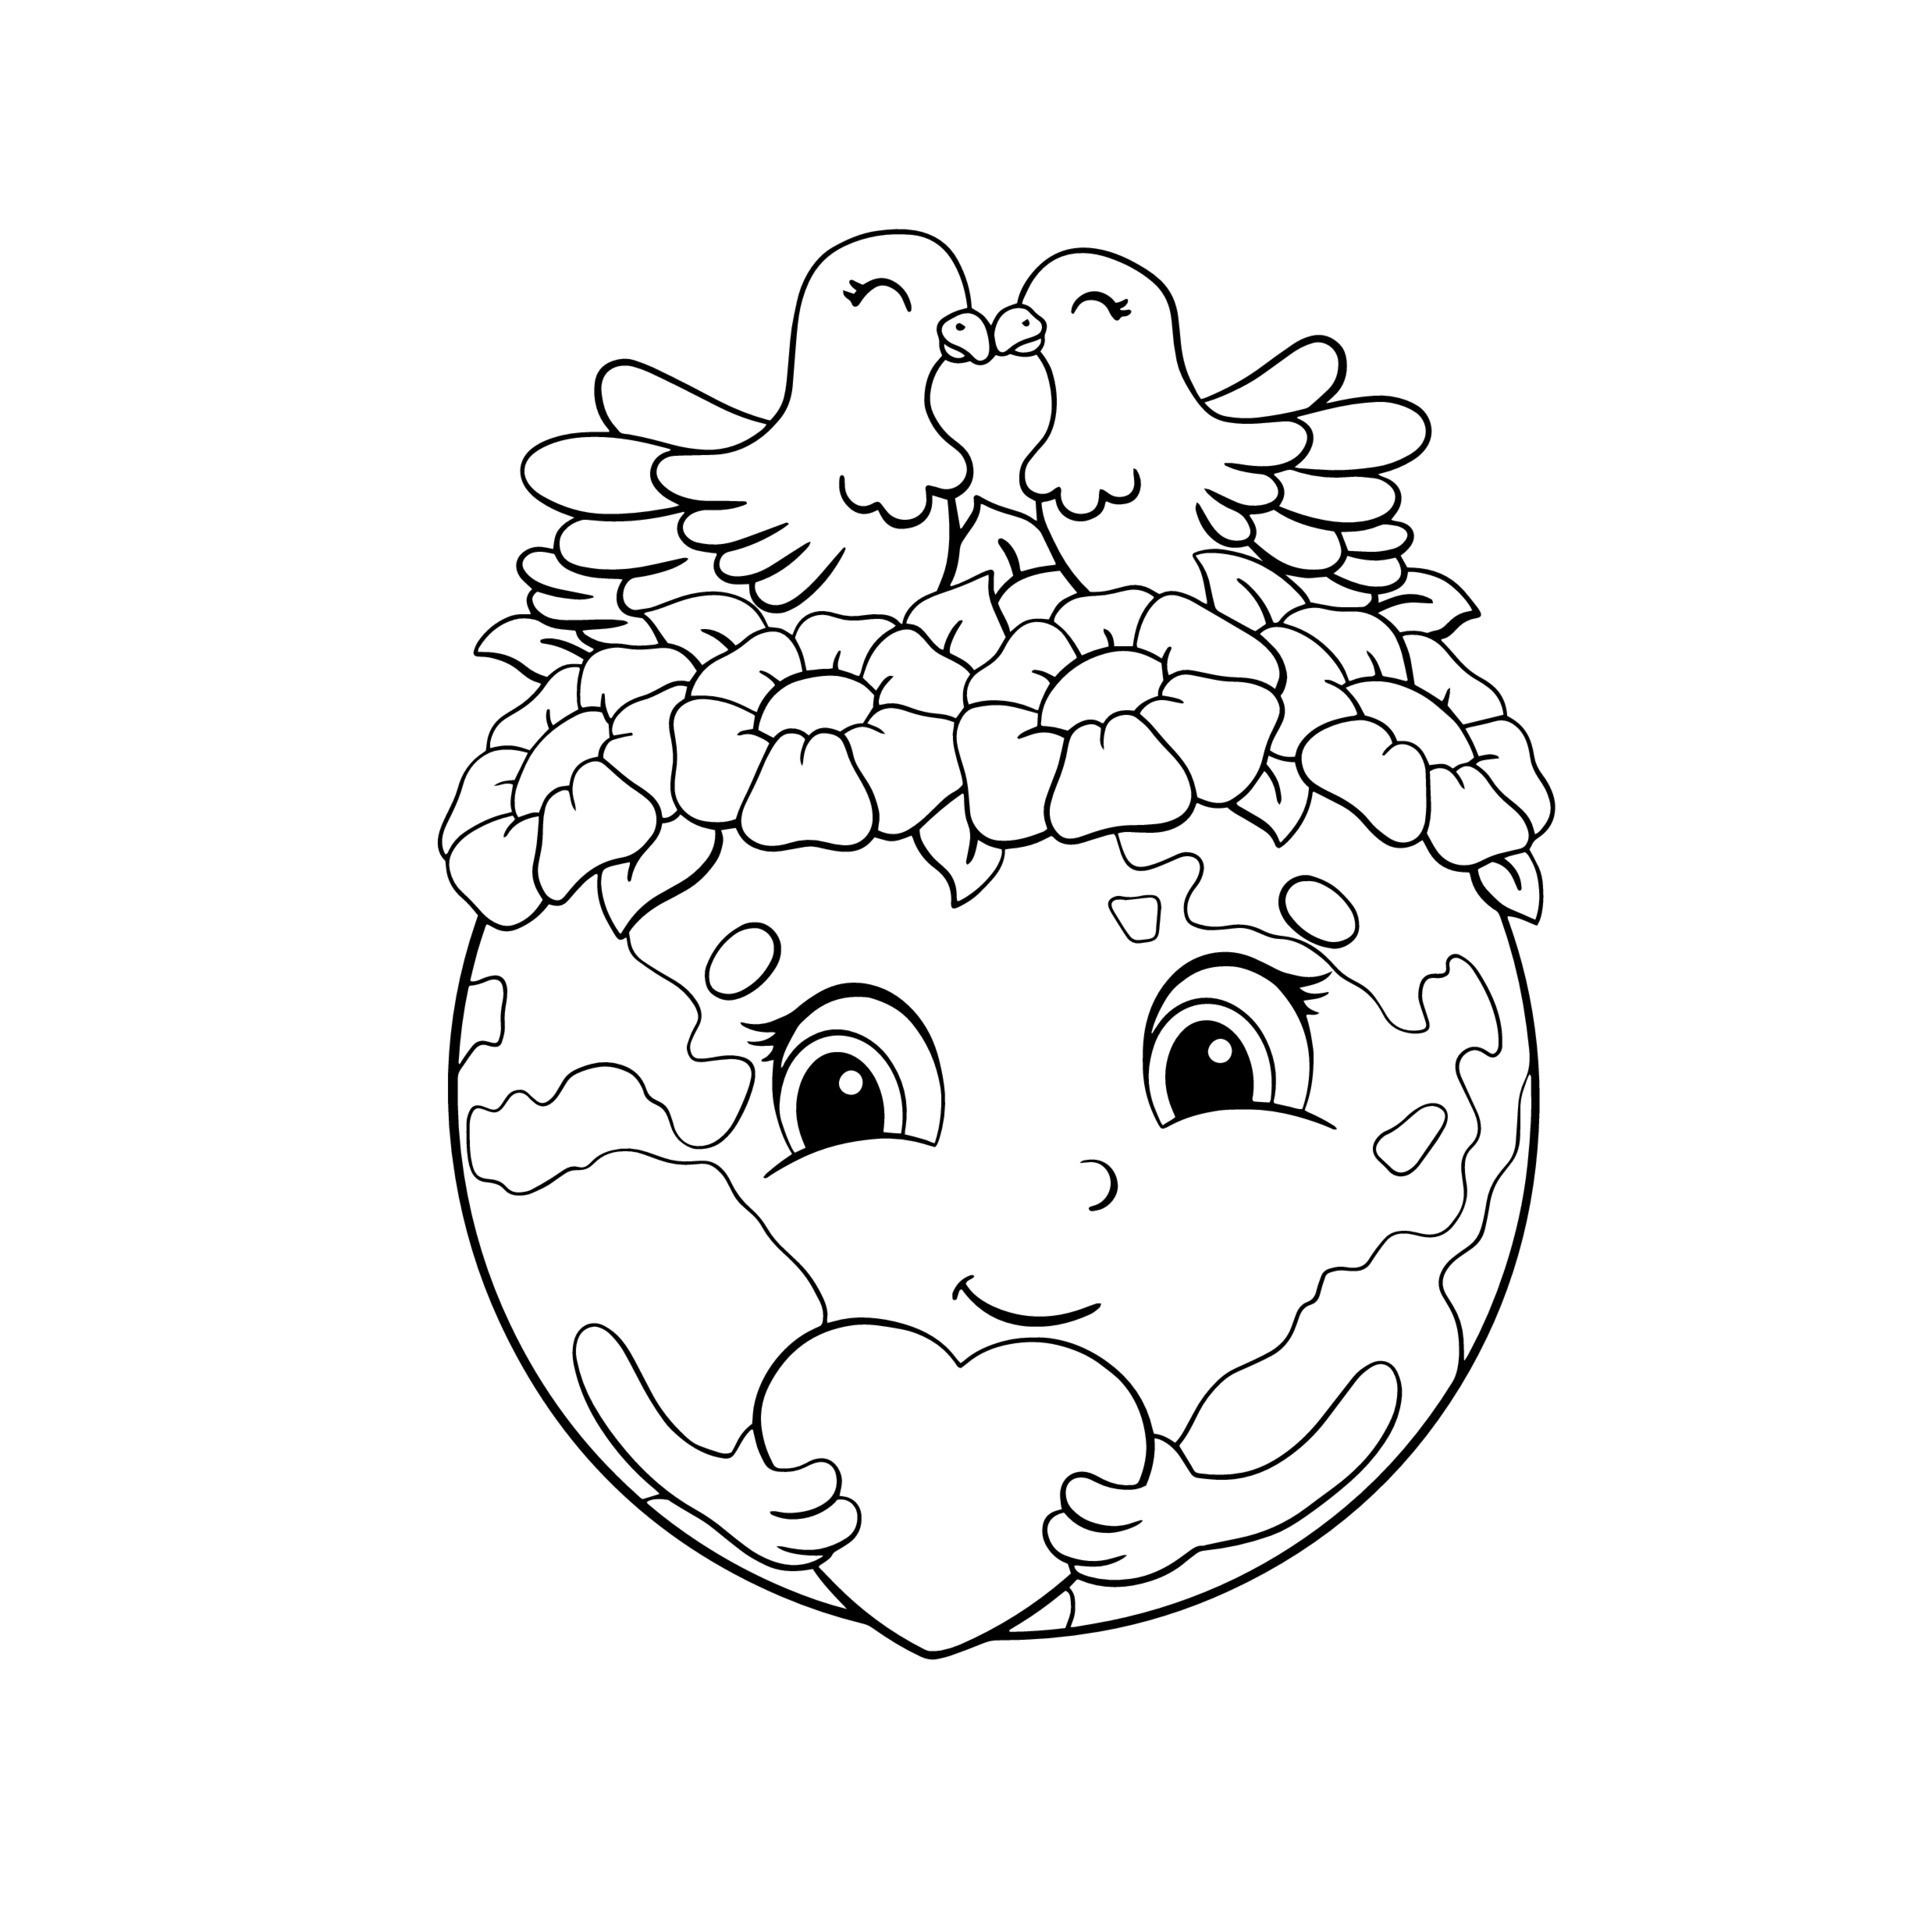 Kids Earth Day Drawing in EPS, Illustrator, JPG, Photoshop, PNG, Portable  Documents, SVG - Download